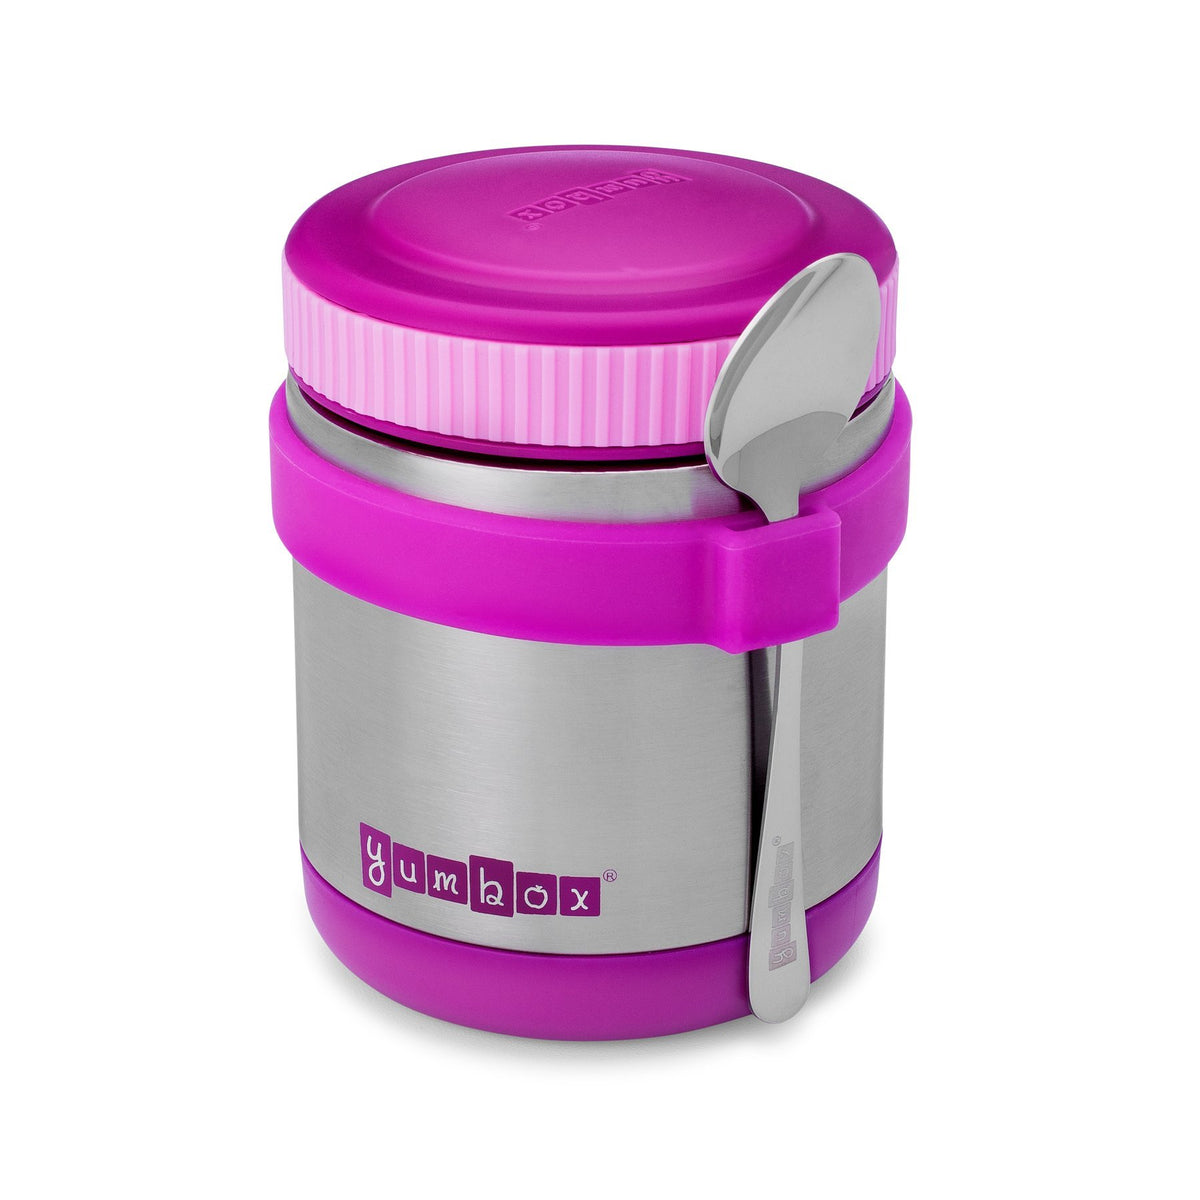 yumbox-zuppa-bijoux-purple-with-spoon-and-band- (2)